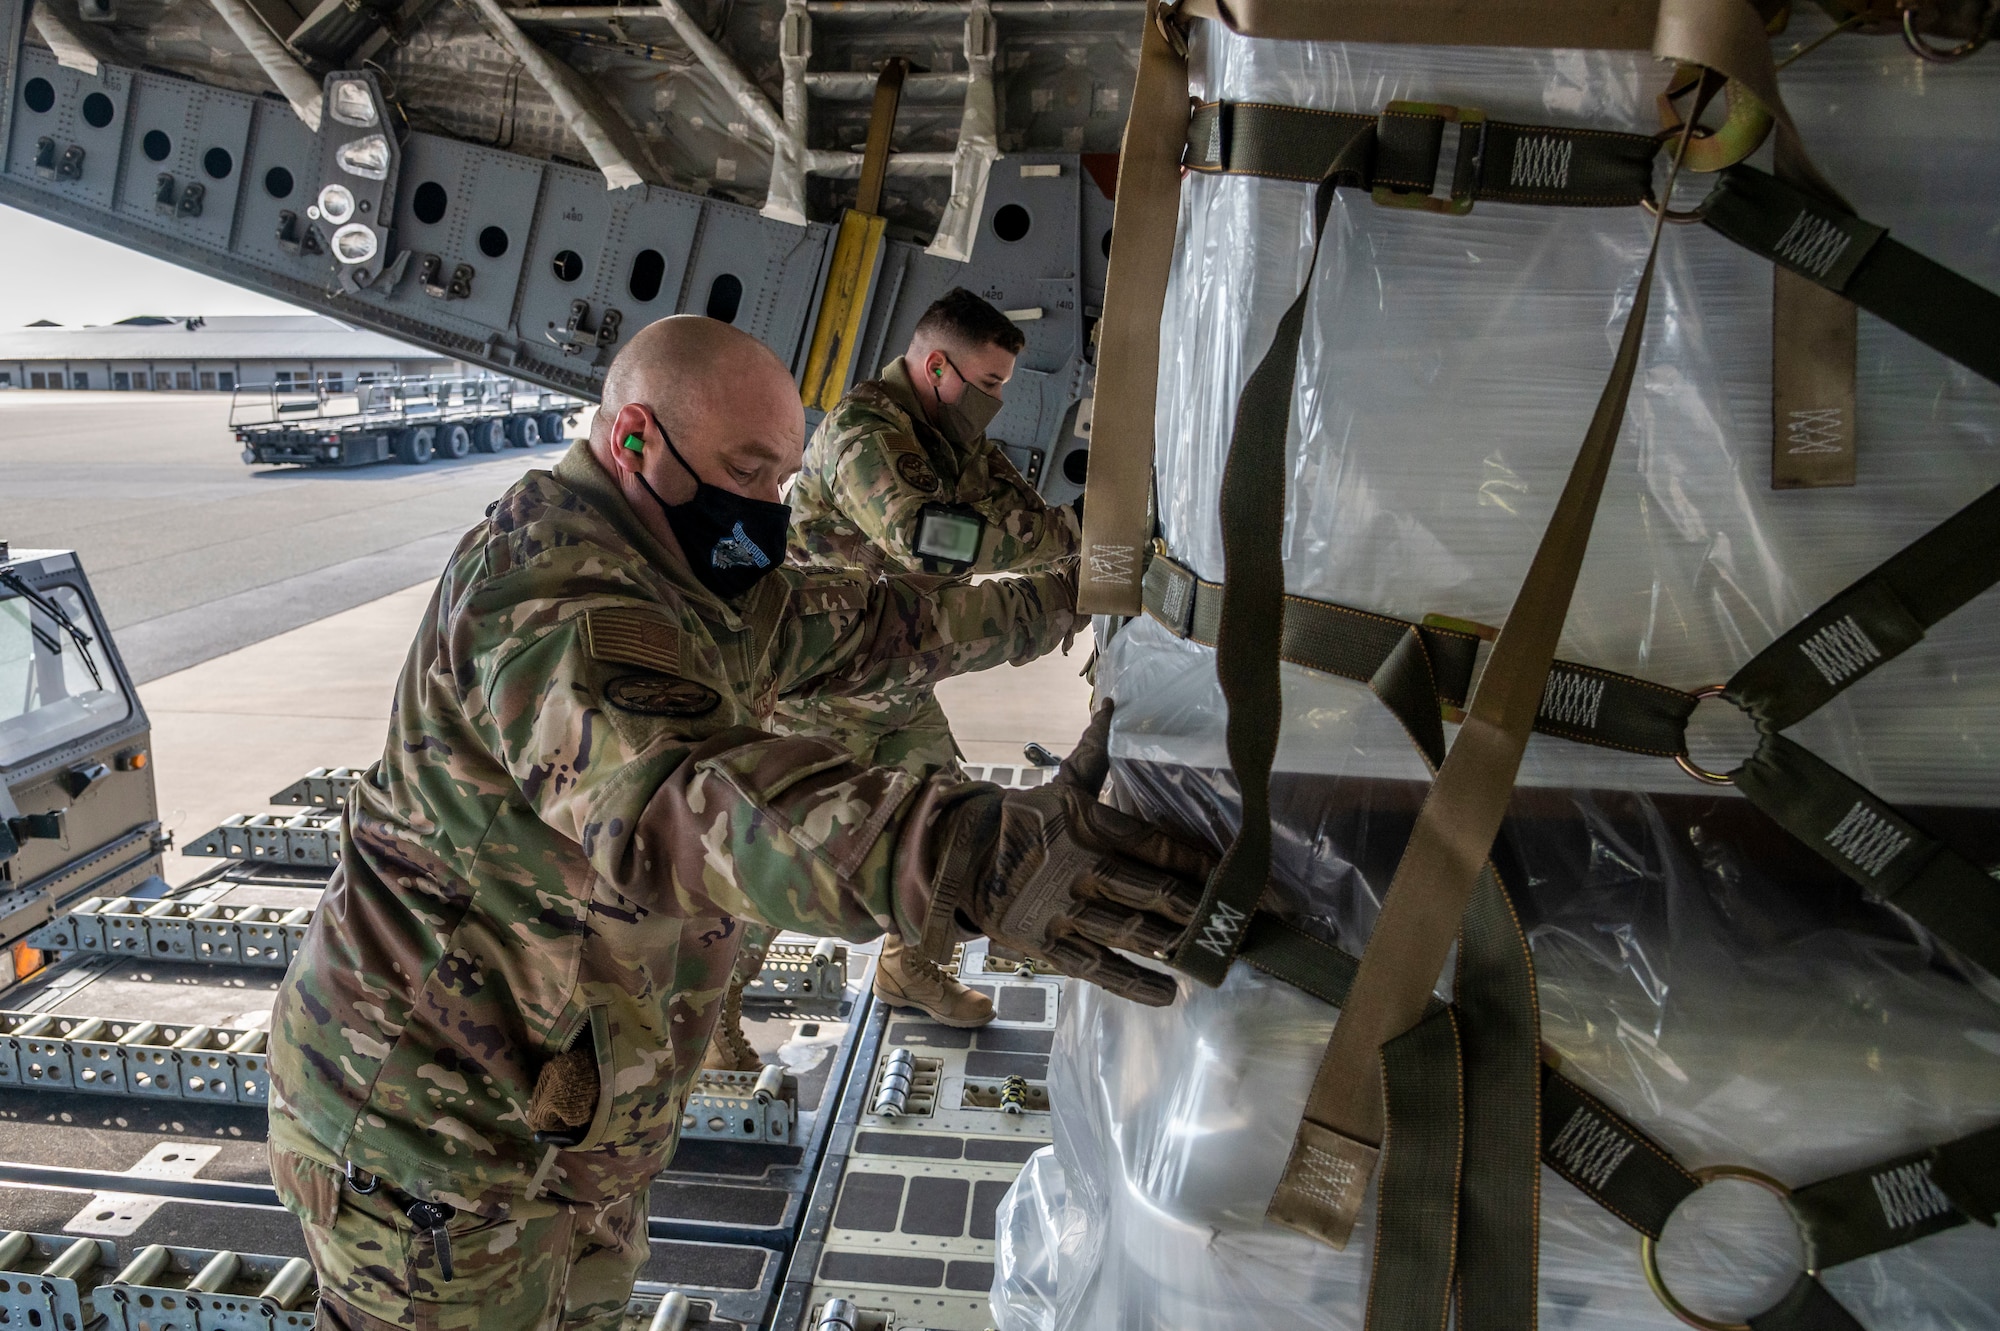 Airmen from the 436th Aerial Port Squadron move cargo onto a Kuwait air force C-17 Globemaster III at Dover Air Force Base, Delaware, Jan. 22, 2021. Kuwait is an important partner in U.S. counterterrorism efforts, providing assistance in the military, diplomatic, and intelligence arenas and also supporting efforts to block financing of terrorist groups. Due to its strategic geographic location, Dover AFB supports approximately $3.5 billion worth of foreign military sales operations annually. (U.S. Air Force photo by Senior Airman Christopher Quail) (This image was altered for security purposes by blurring identification badges)